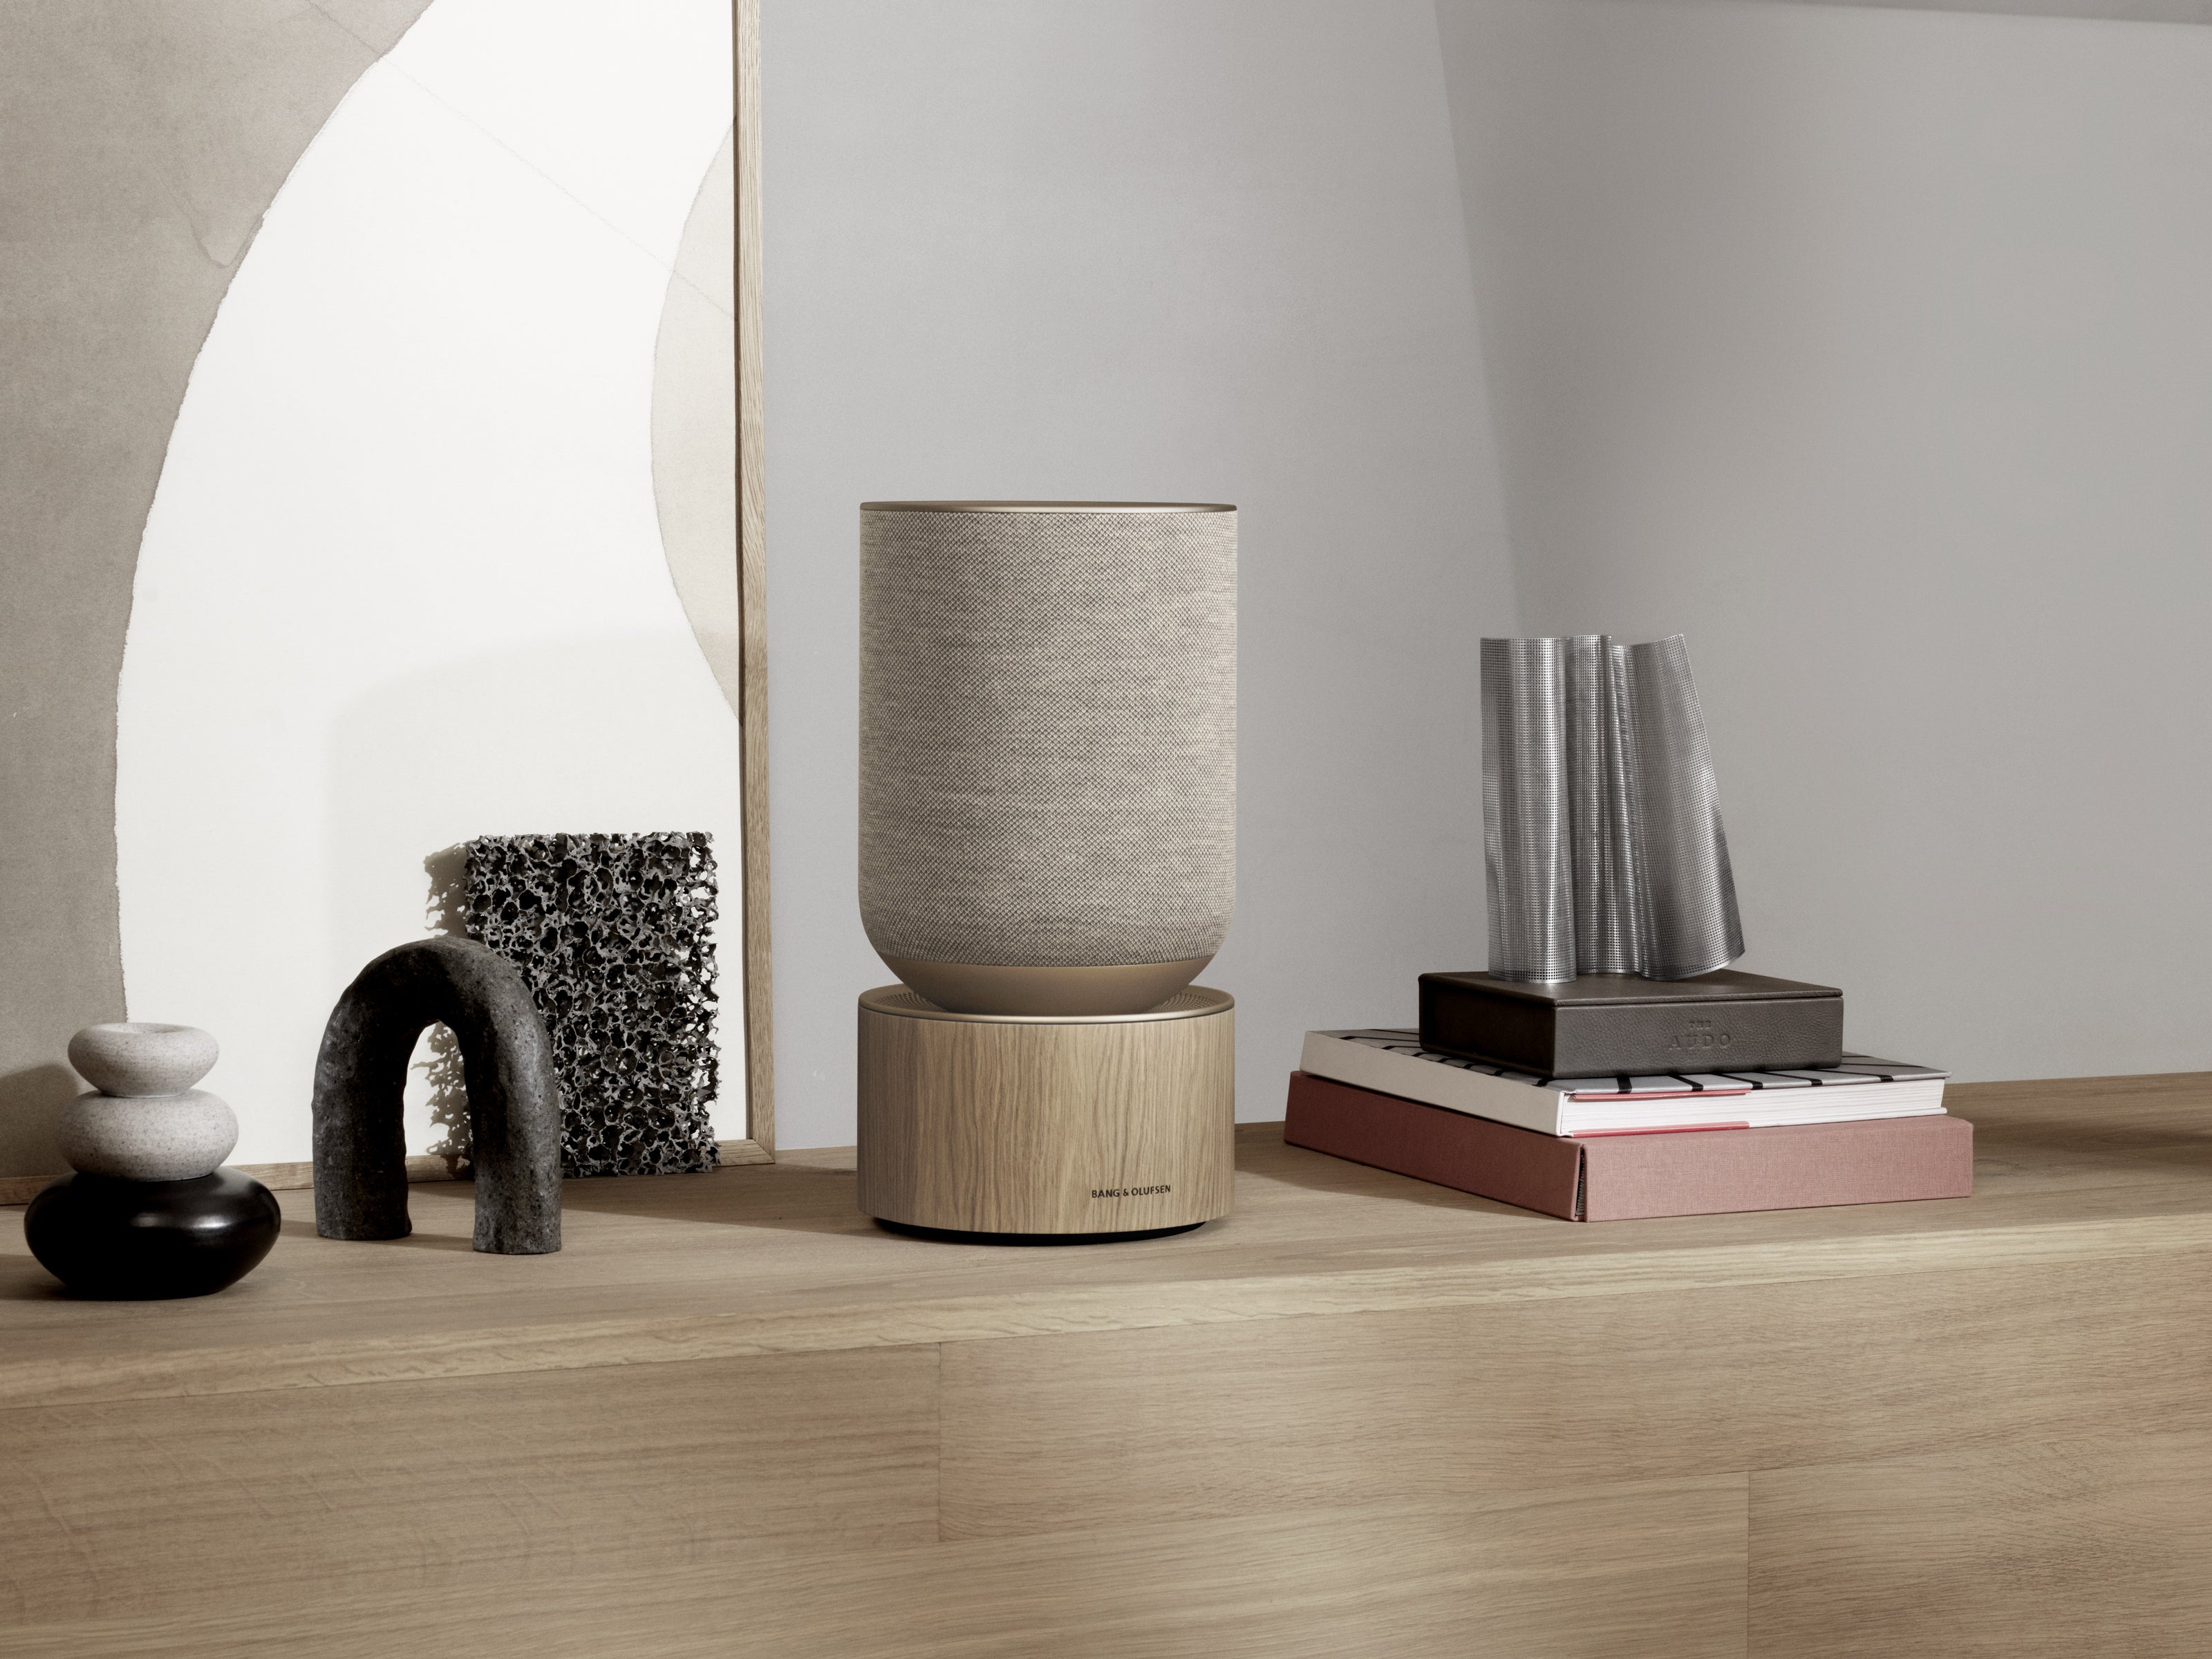 Bang & Olufsen : Luxury home sound systems in Torino